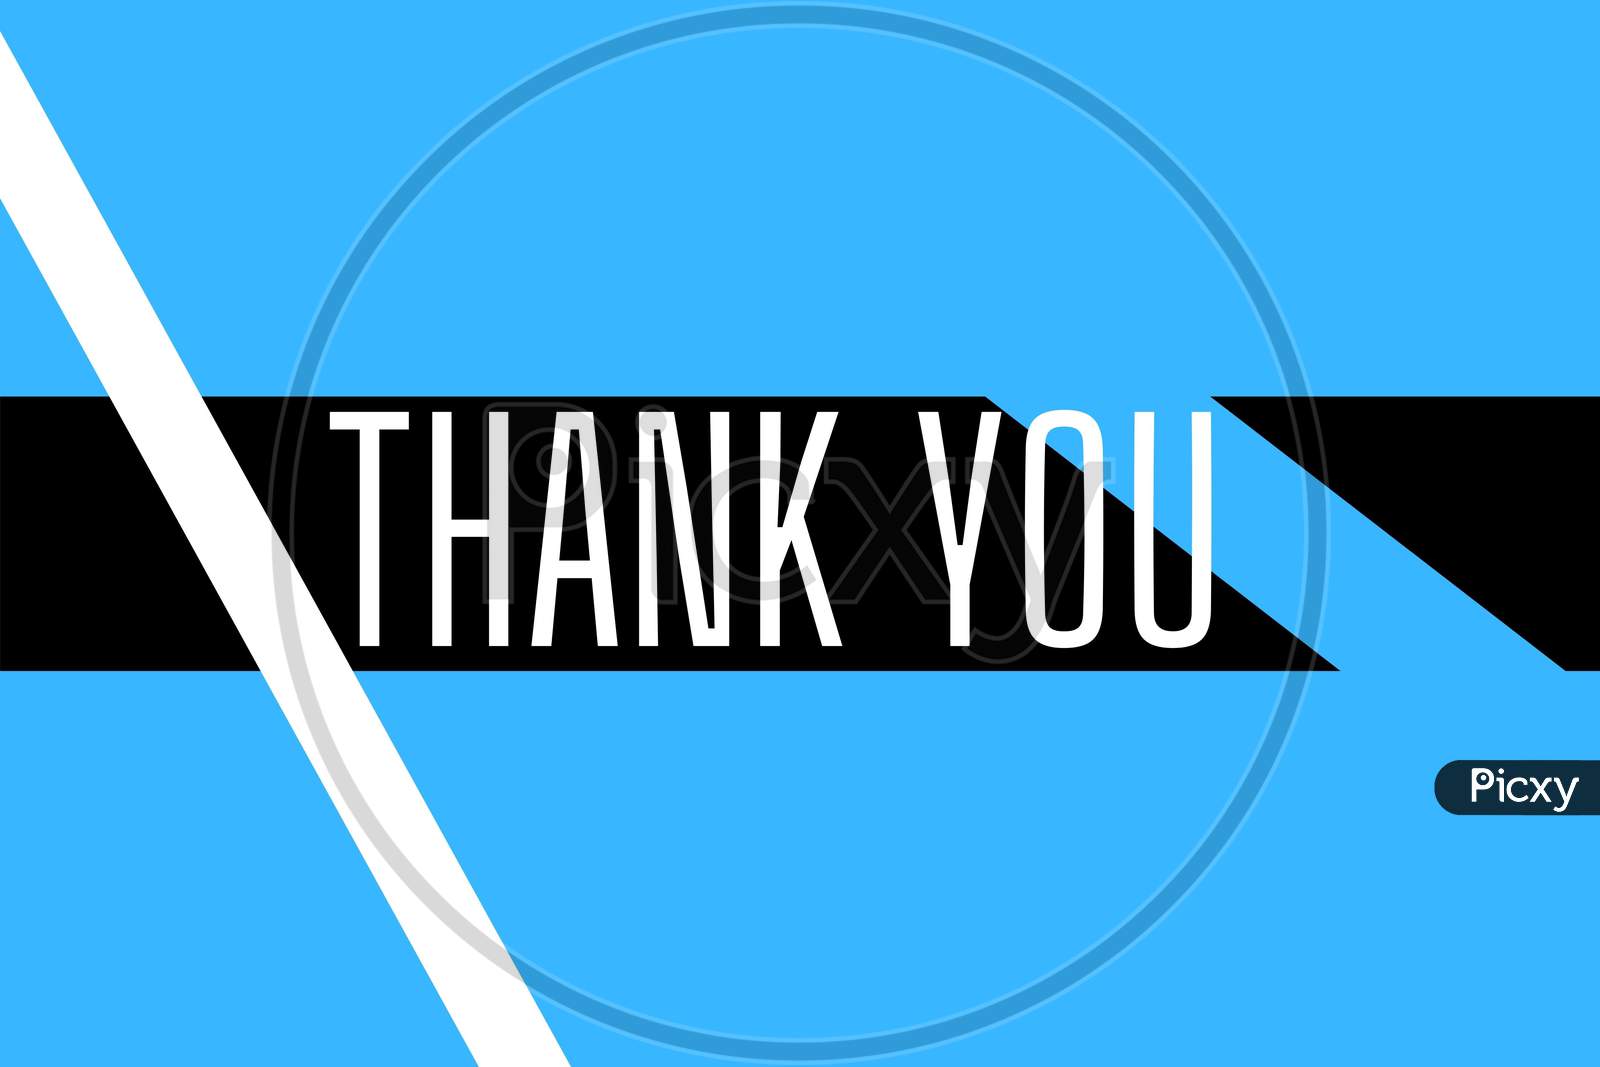 Thank You Poster With Spectrum Brush Strokes With Blue Background